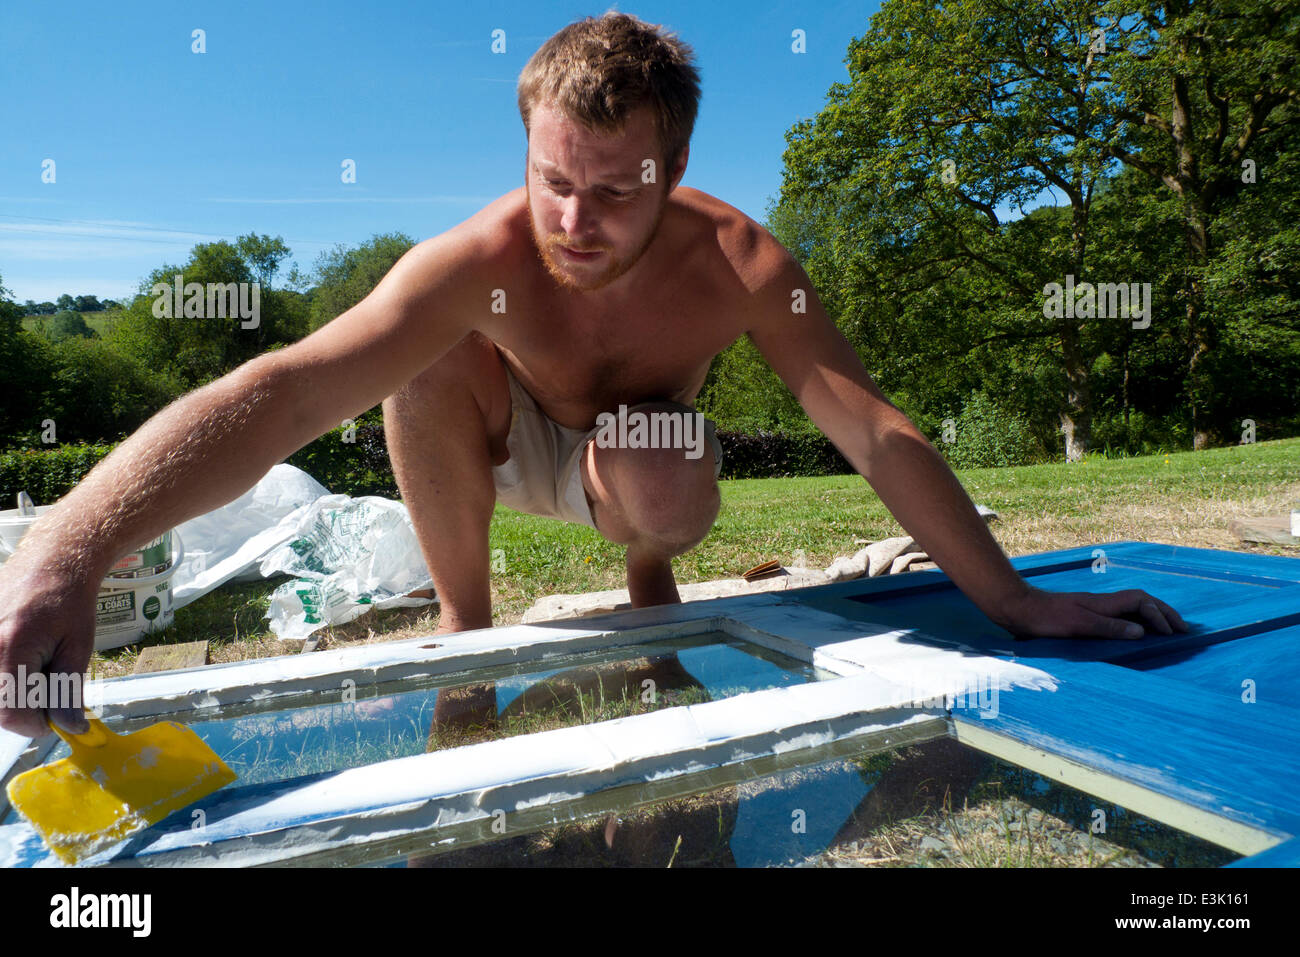 Llanwrda Carmarthenshire Wales UK, 24th June 2014.  Self-employed painter and decorator Ben Shipman takes advantage of fine weather and blue skies in rural West Wales to apply paint stripper to a client's door. The end of a settled period of two weeks of continuous sunshine is in view. Kathy deWitt/Alamy Live News Stock Photo